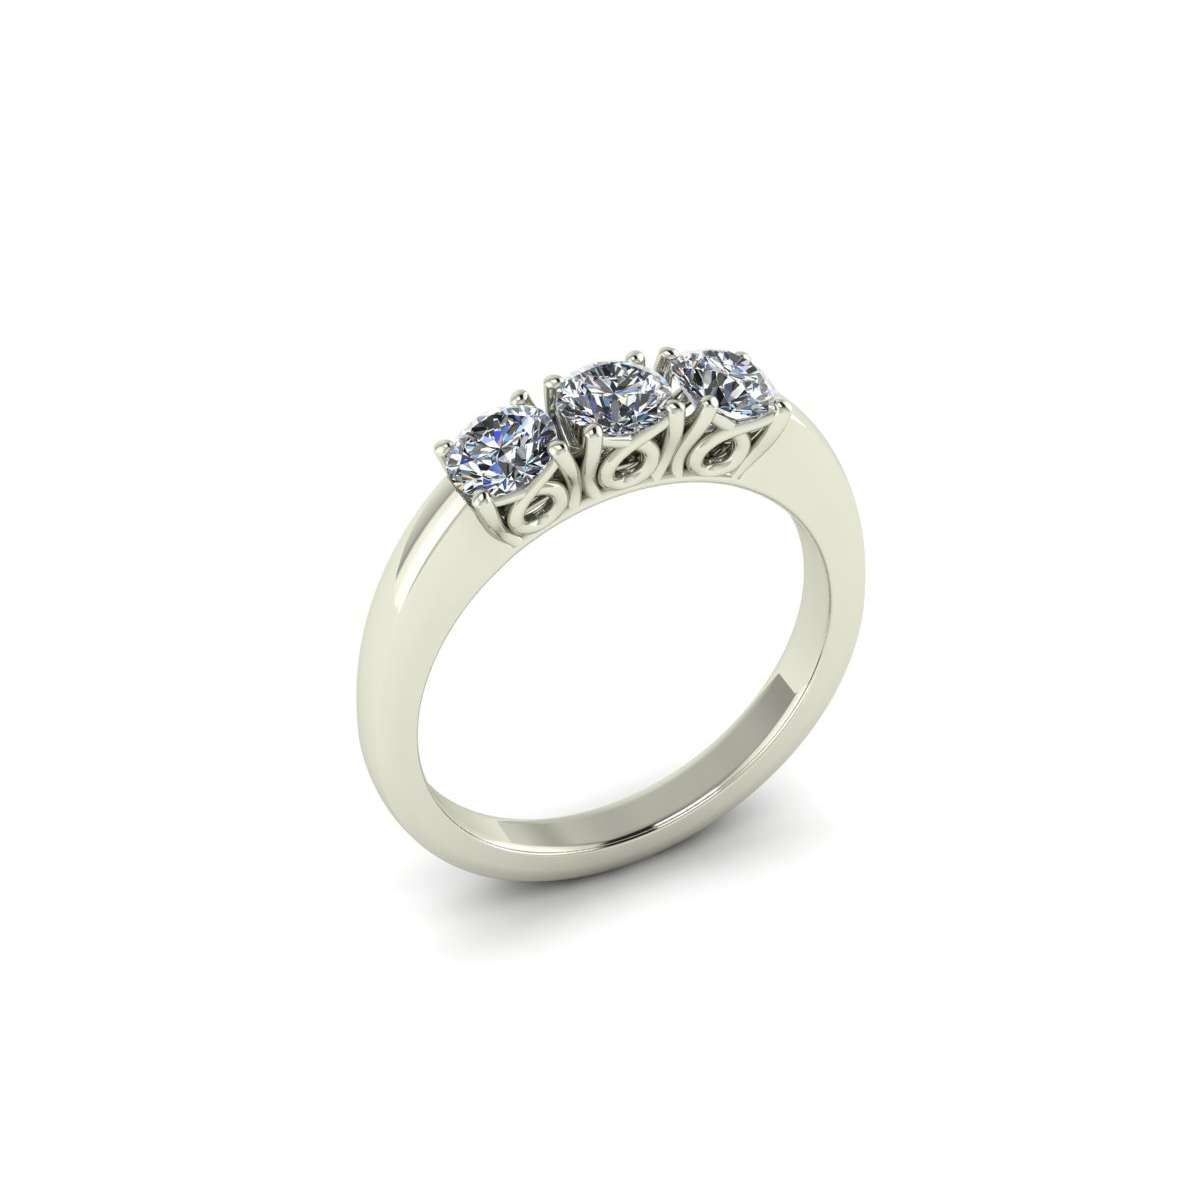 Trilogy ring made of white gold with GIA carat 0,90 D-IF certified diamonds